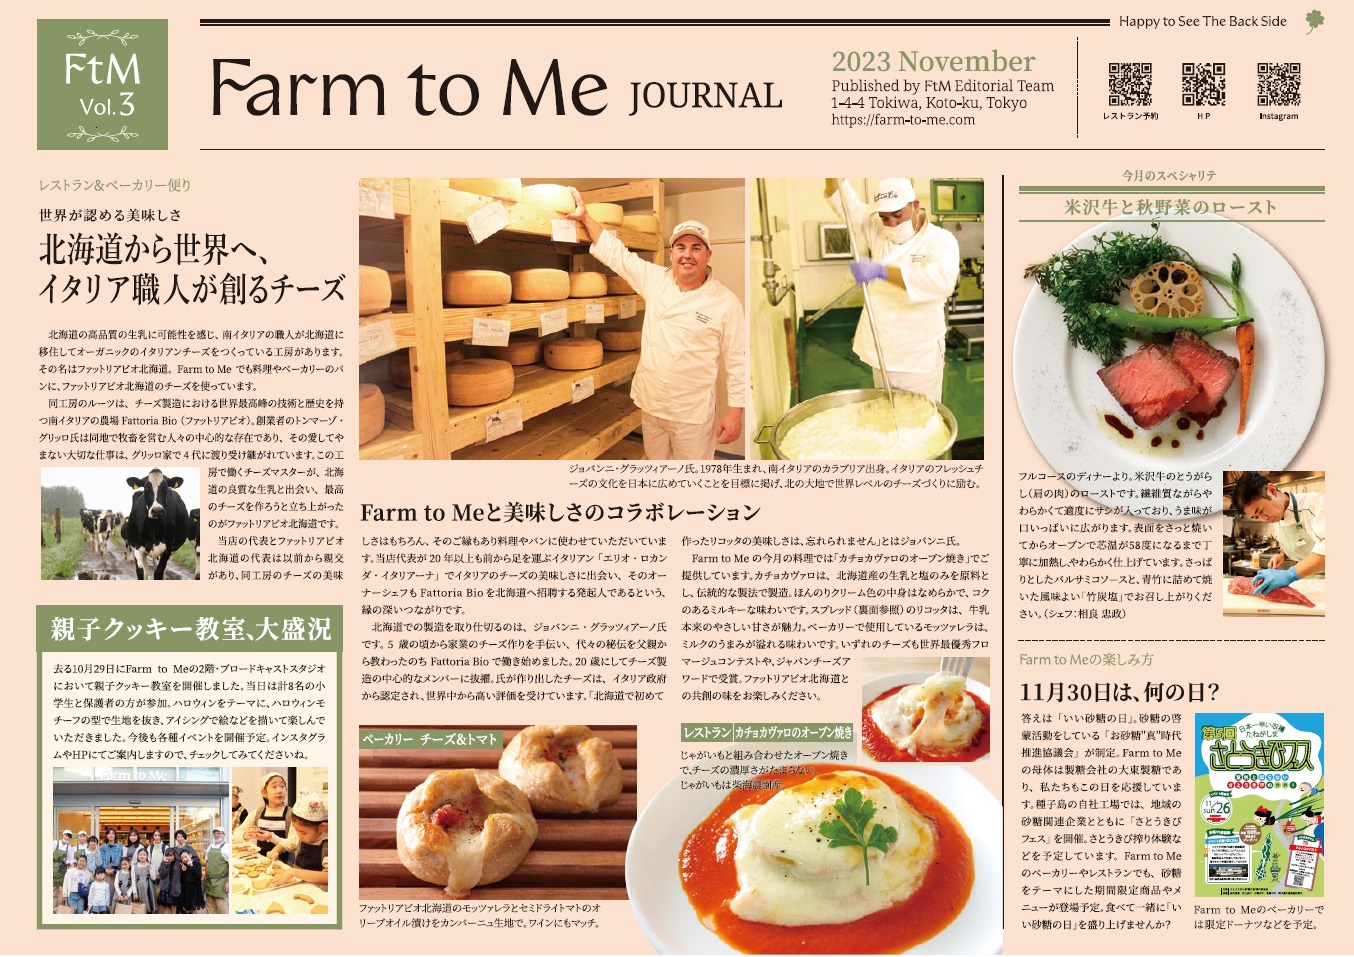 Farm to Me JOURNAL Vol.3をアップしました